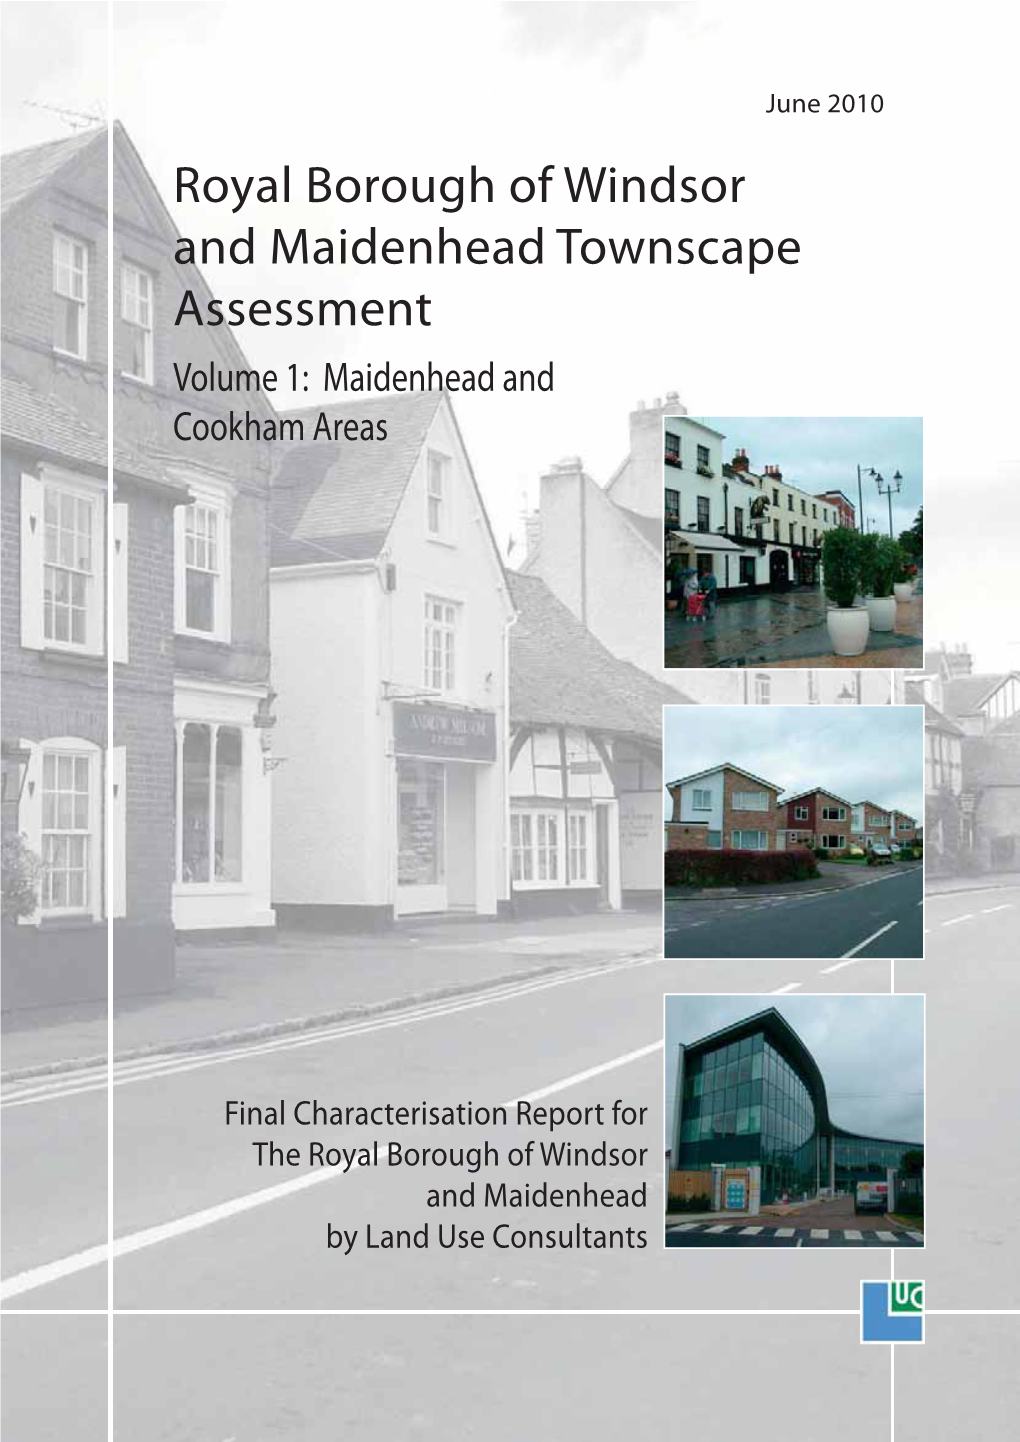 Royal Borough of Windsor and Maidenhead Townscape Assessment Volume 1: Maidenhead and Cookham Areas